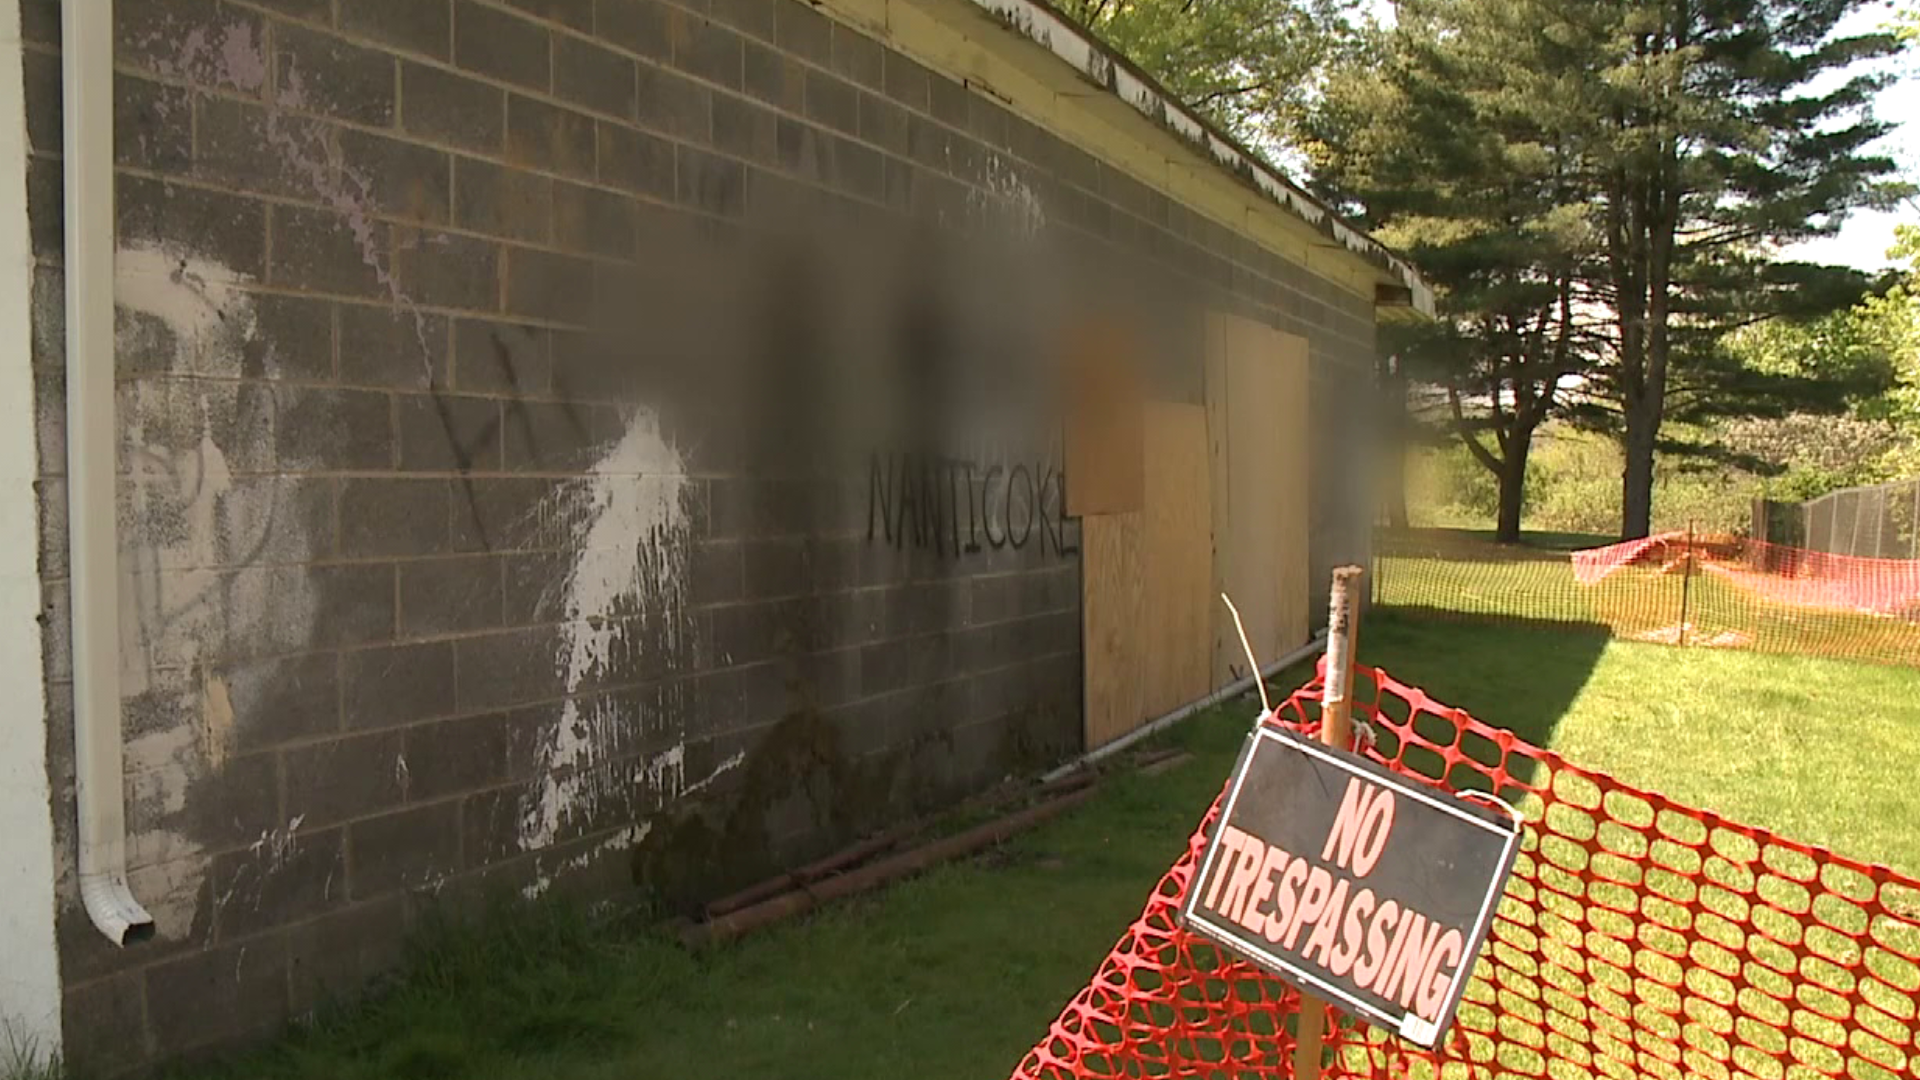 A wall was destroyed and then spray painted by vandals at Quality Hill Park.